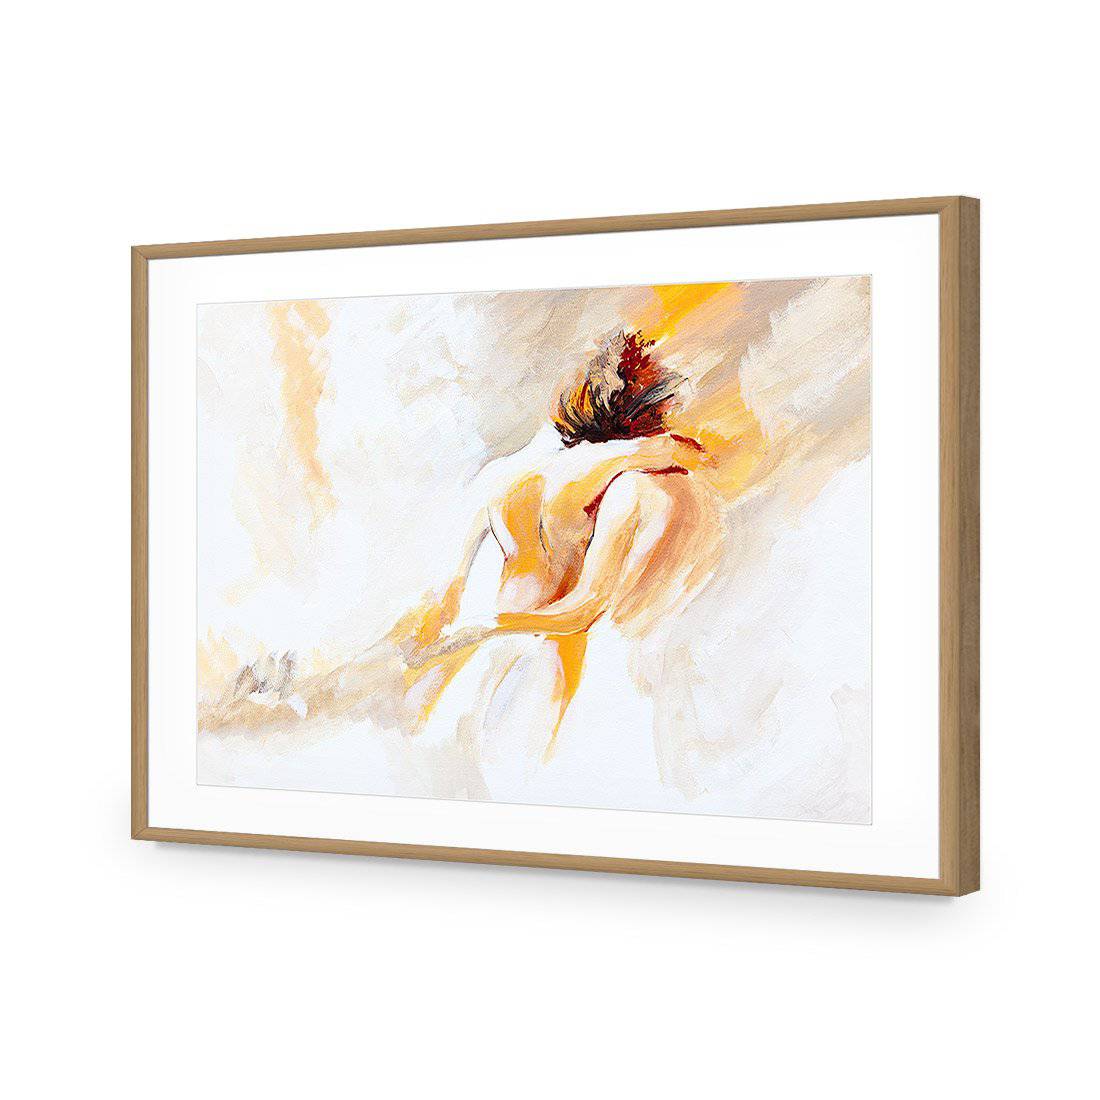 Naked Emotion-Acrylic-Wall Art Design-With Border-Acrylic - Oak Frame-45x30cm-Wall Art Designs